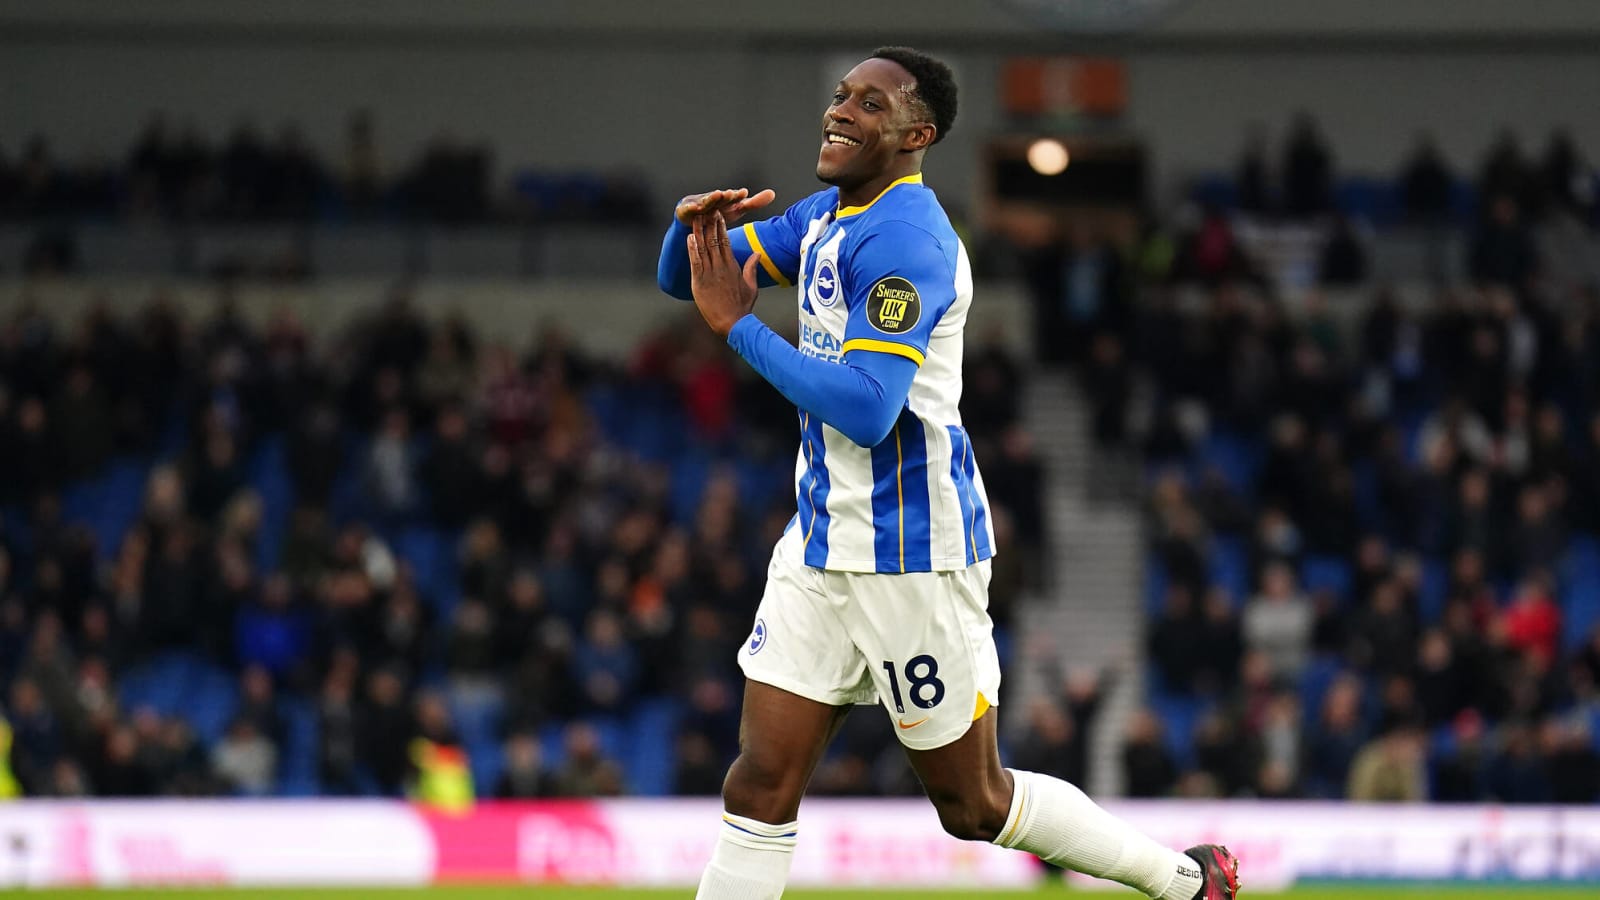 Watch: Brighton’s Welbeck crashes shot against the bar with Man City keeper beaten